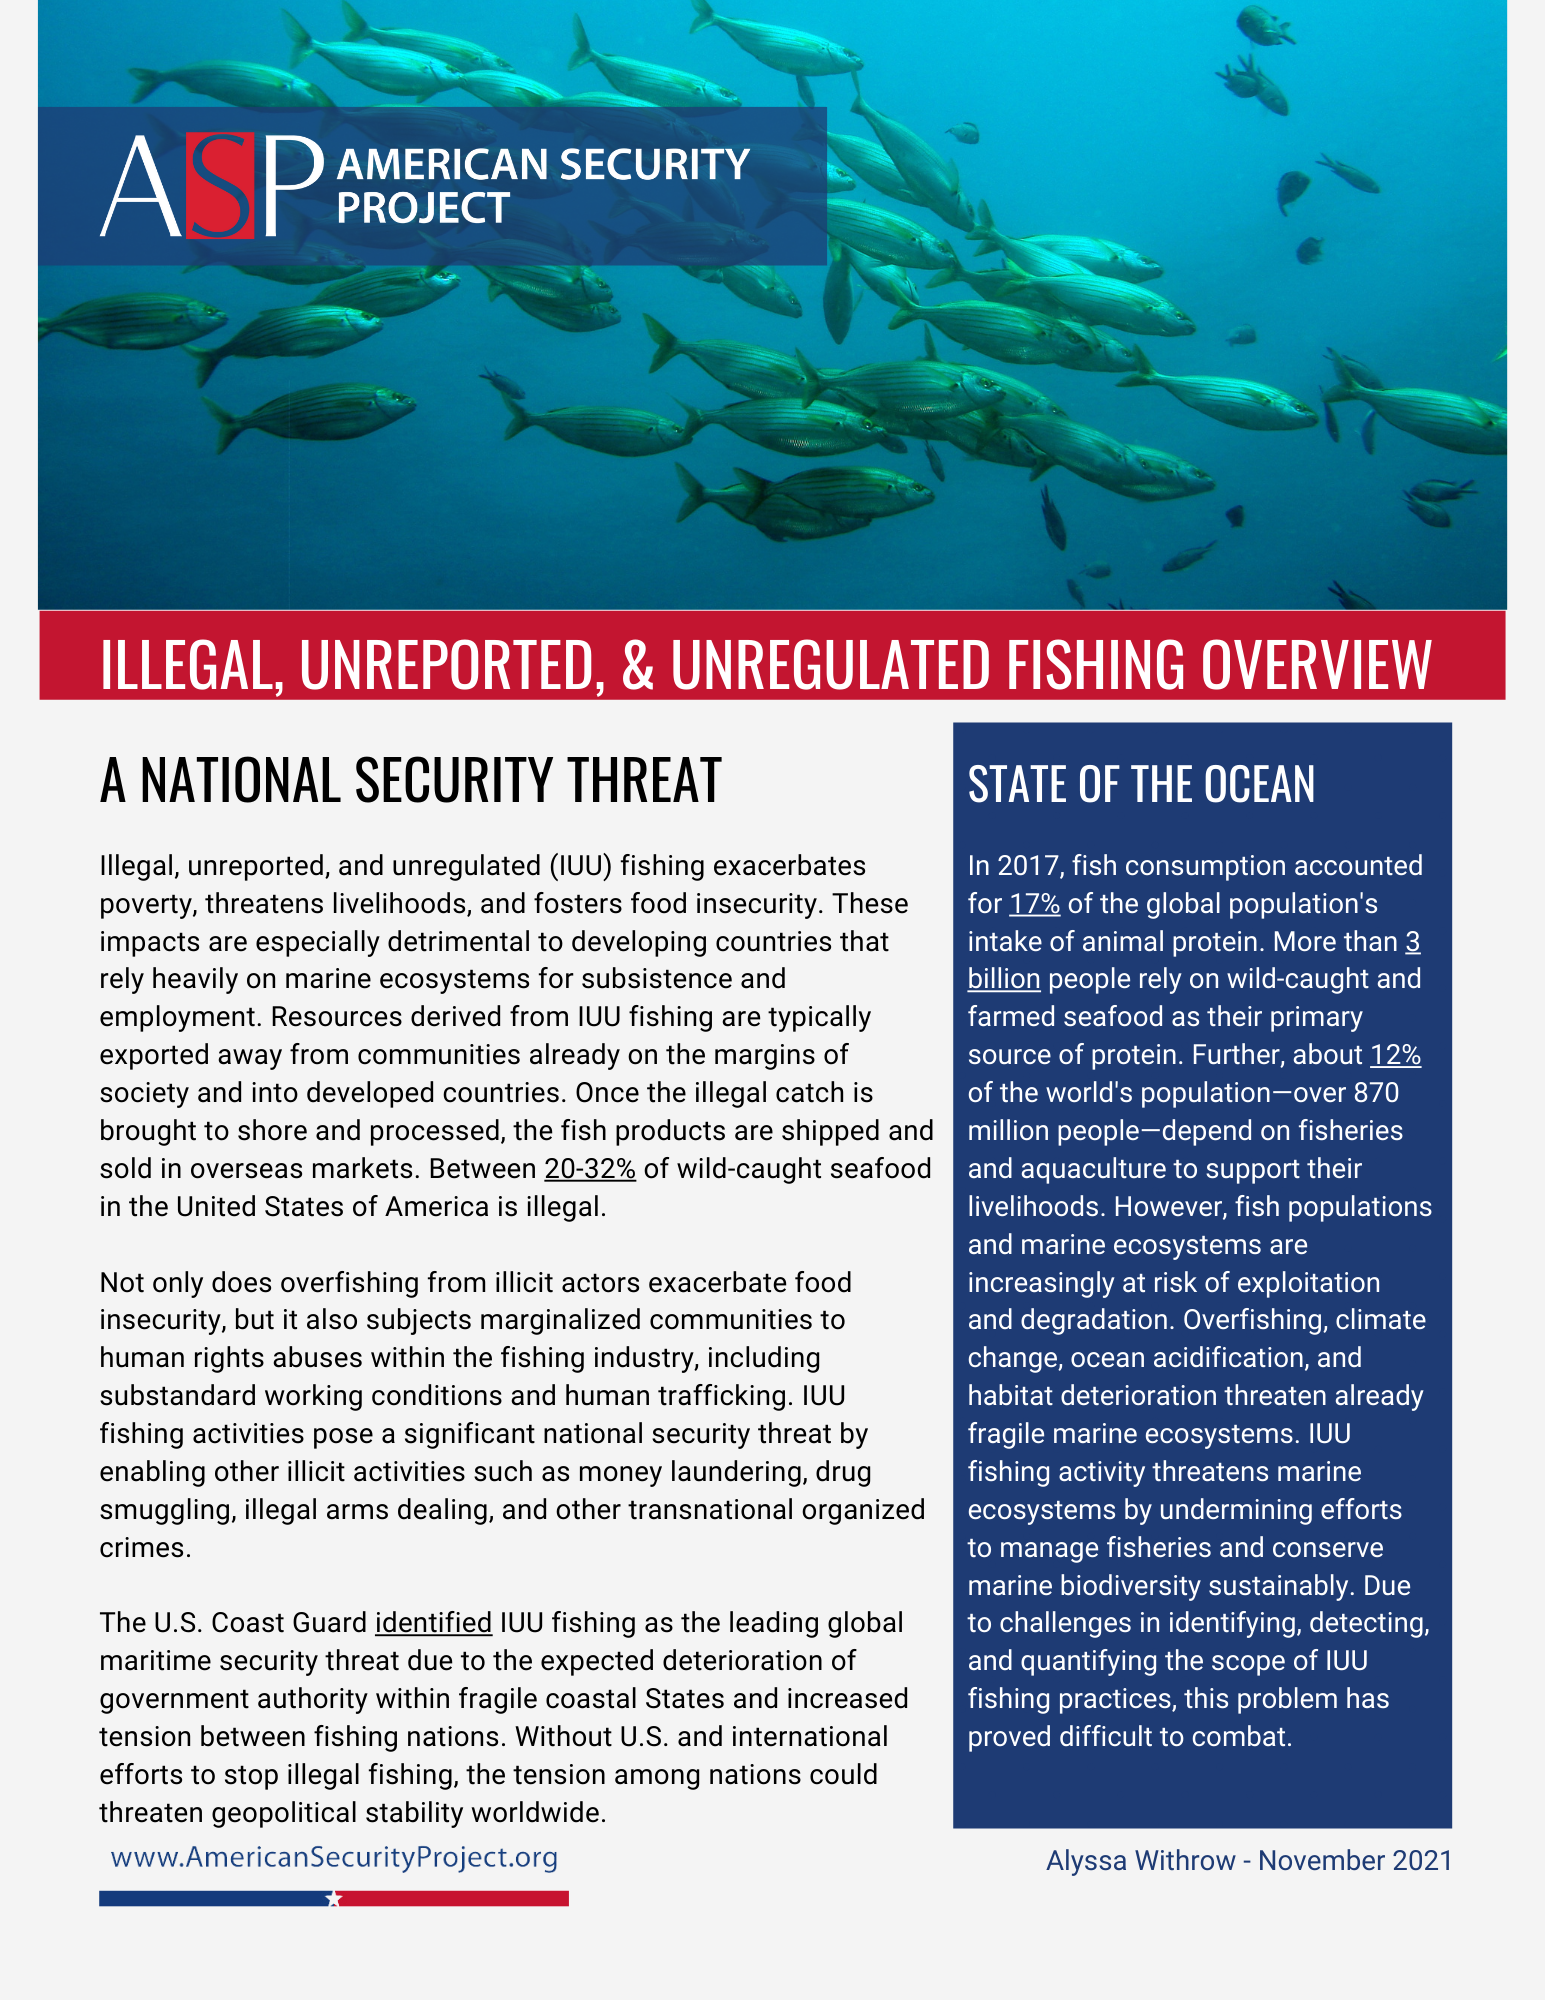 Briefing Note – Illegal, Unreported, and Unregulated Fishing Overview